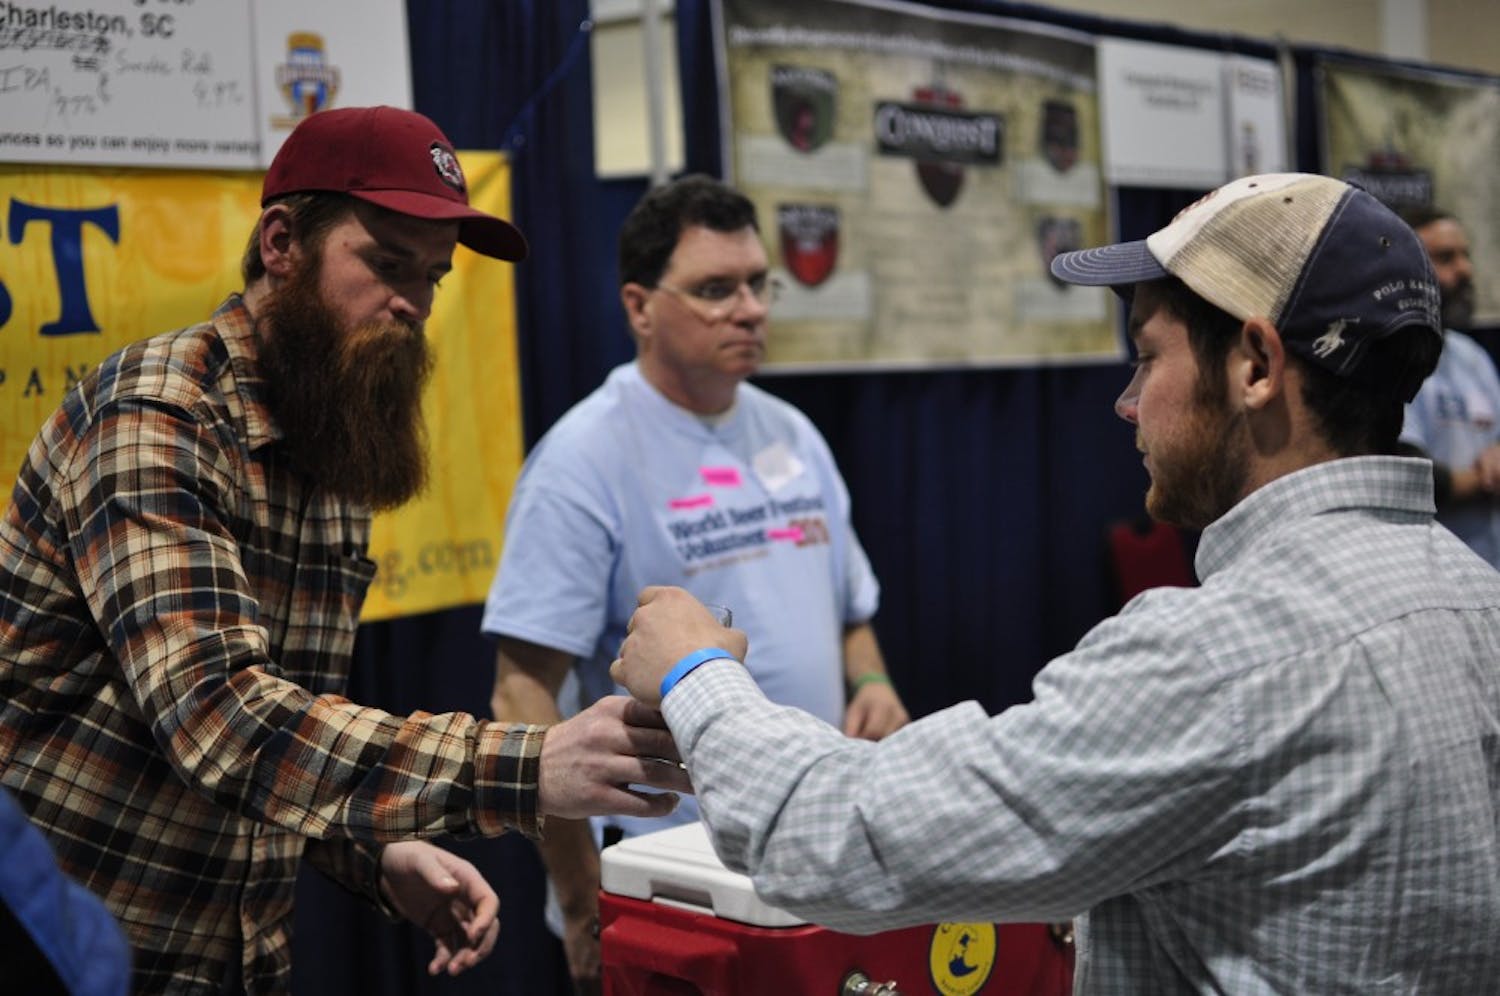 	The 6th annual World Beer Festival returned to the Columbia Convention Center on Jan. 18 with pools of beer, dudes in lederhosen and thousands of pretzel necklaces. Tasters of all kinds (from the 鶹С򽴫ýed beer snob to the college student with a pallet accustomed to Natural Light) perused taps from dozens of breweries, filled complimentary tasting glasses with generous samples of over 150 craft flavors and fought through 5 p.m. hangovers.